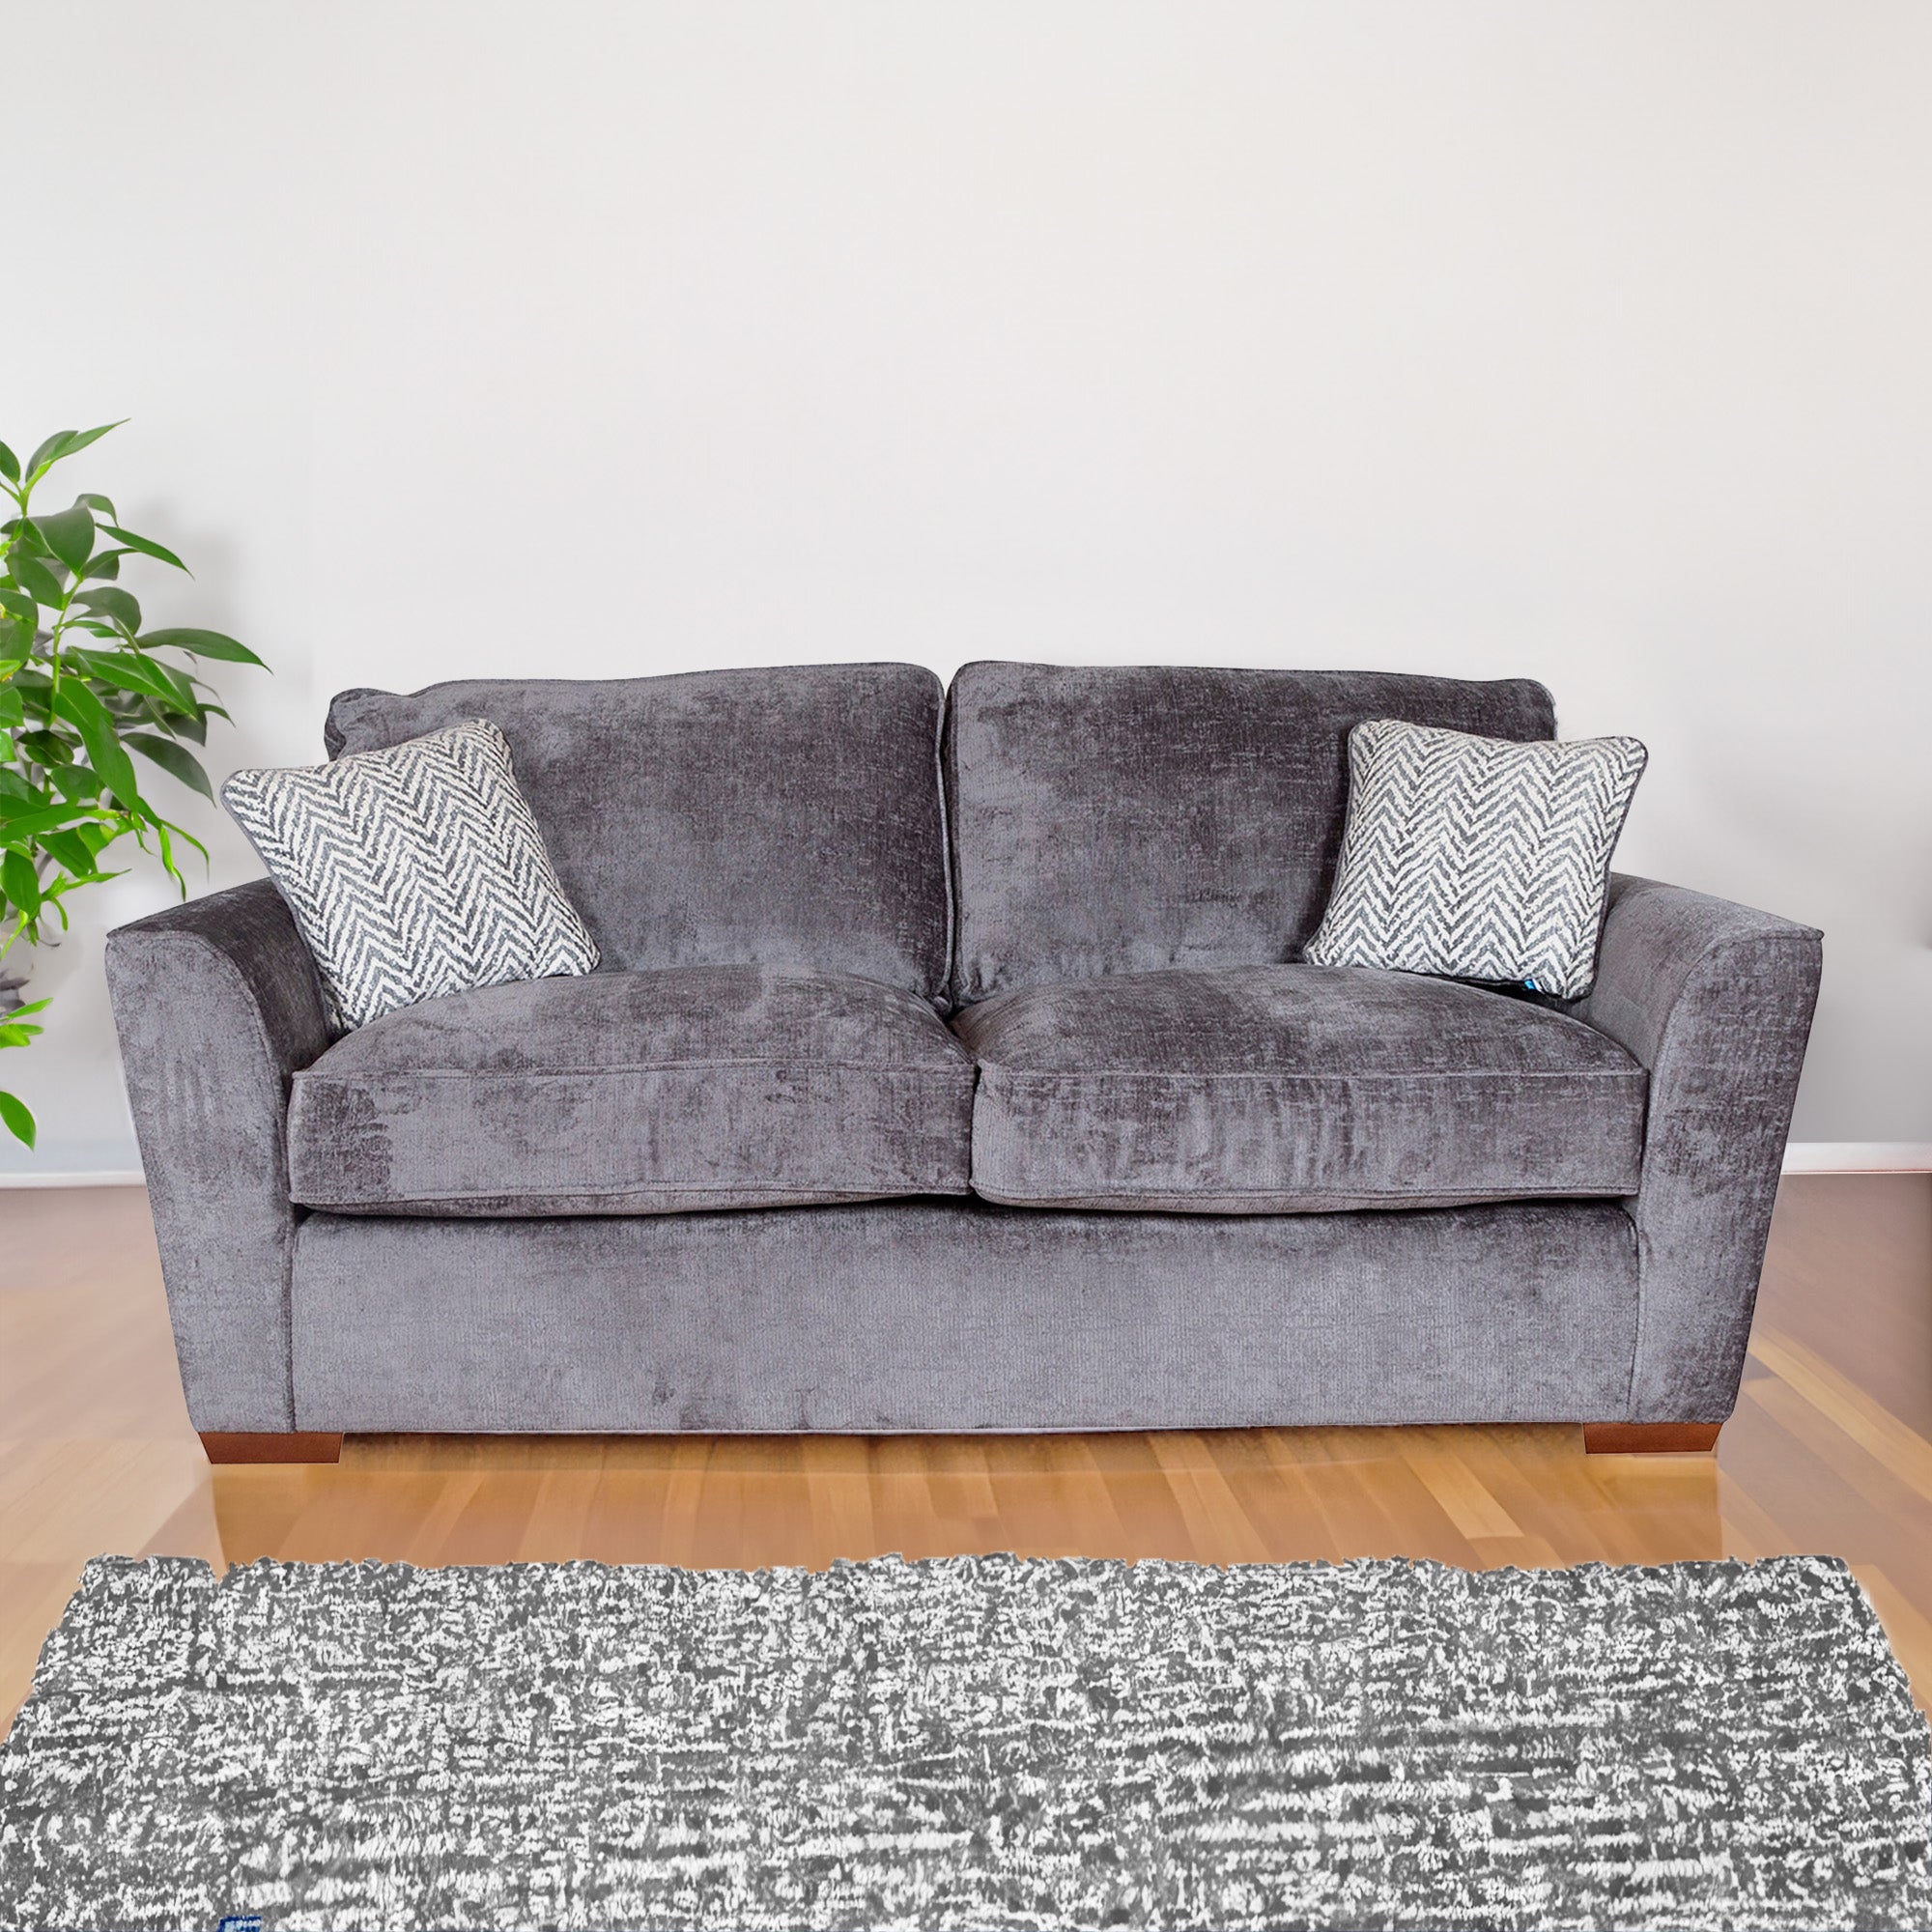 Standard Back 3 Seat Sofa In Fabric Grade D Inc 2 Scatter Cushions